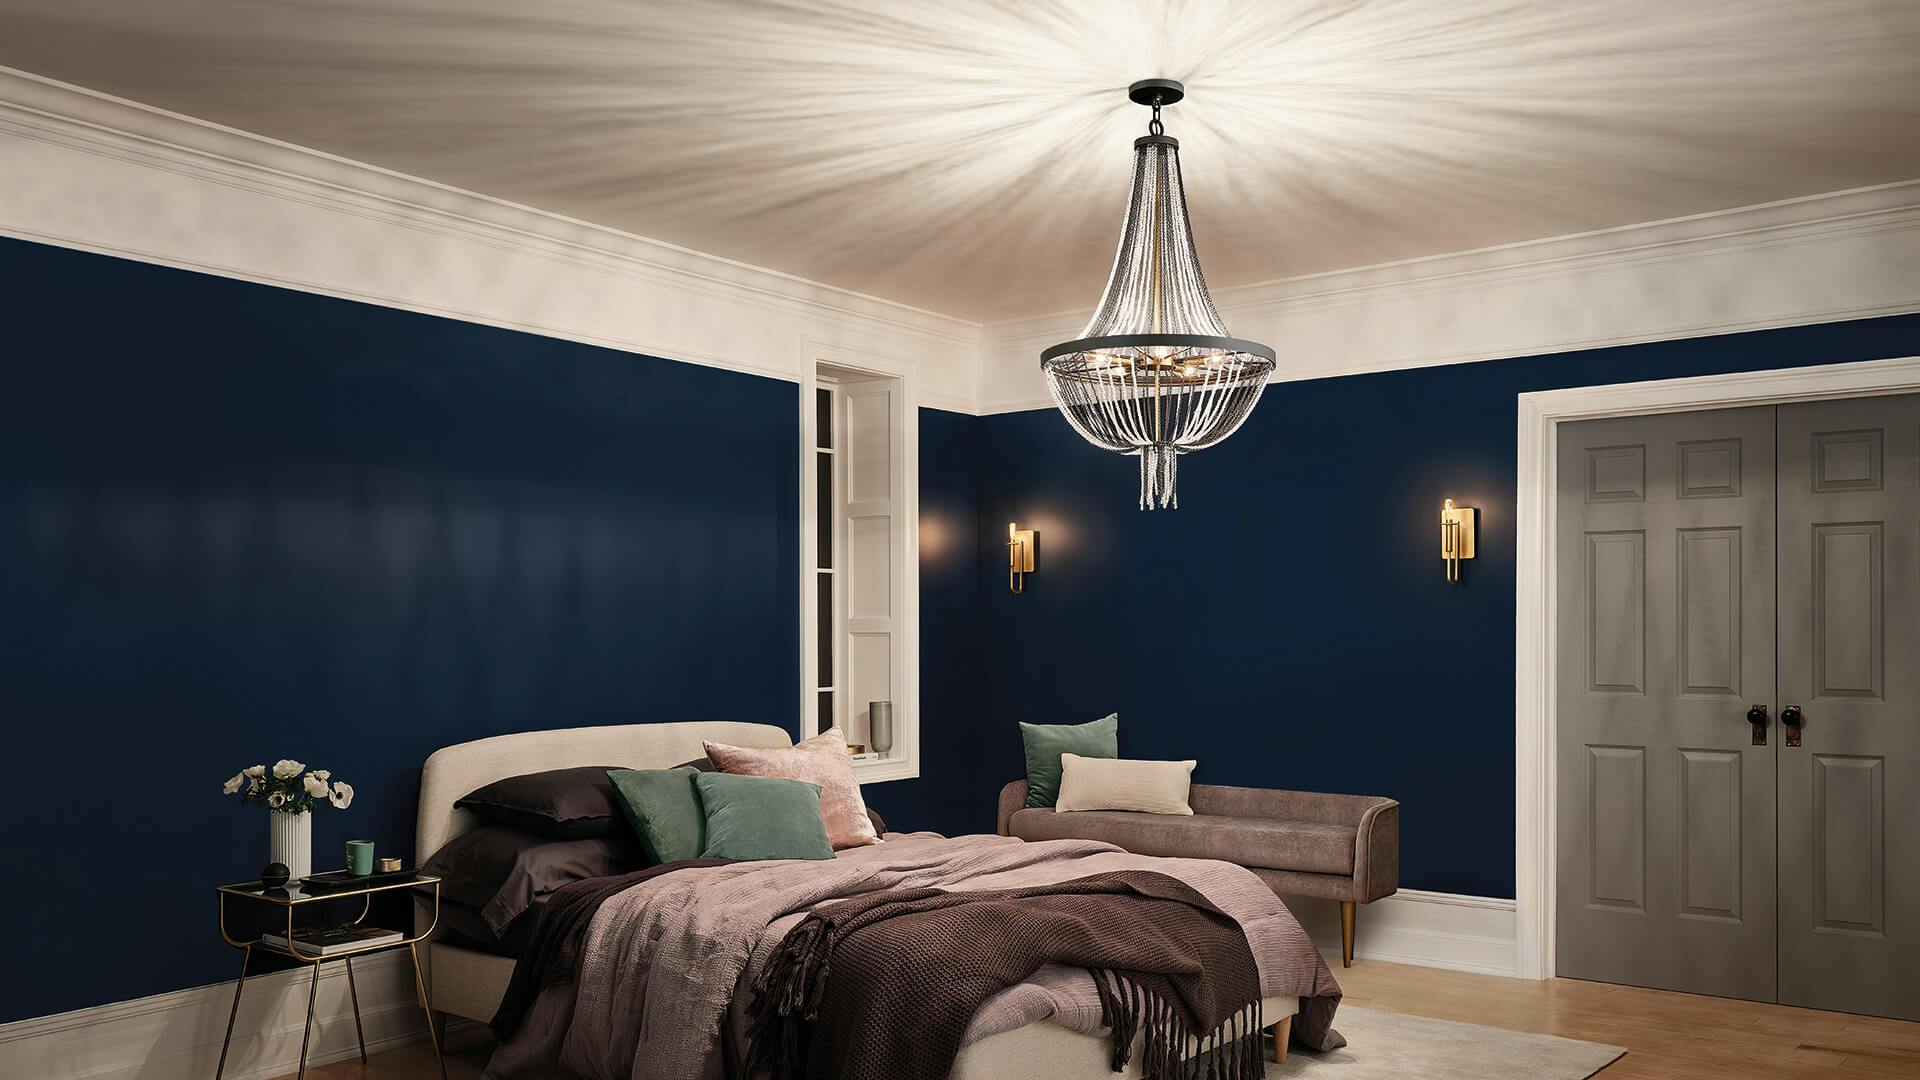 Bedroom with an Alexia chandelier casting sharp, angled shadows across the ceiling while two Alden sconces light the back wall